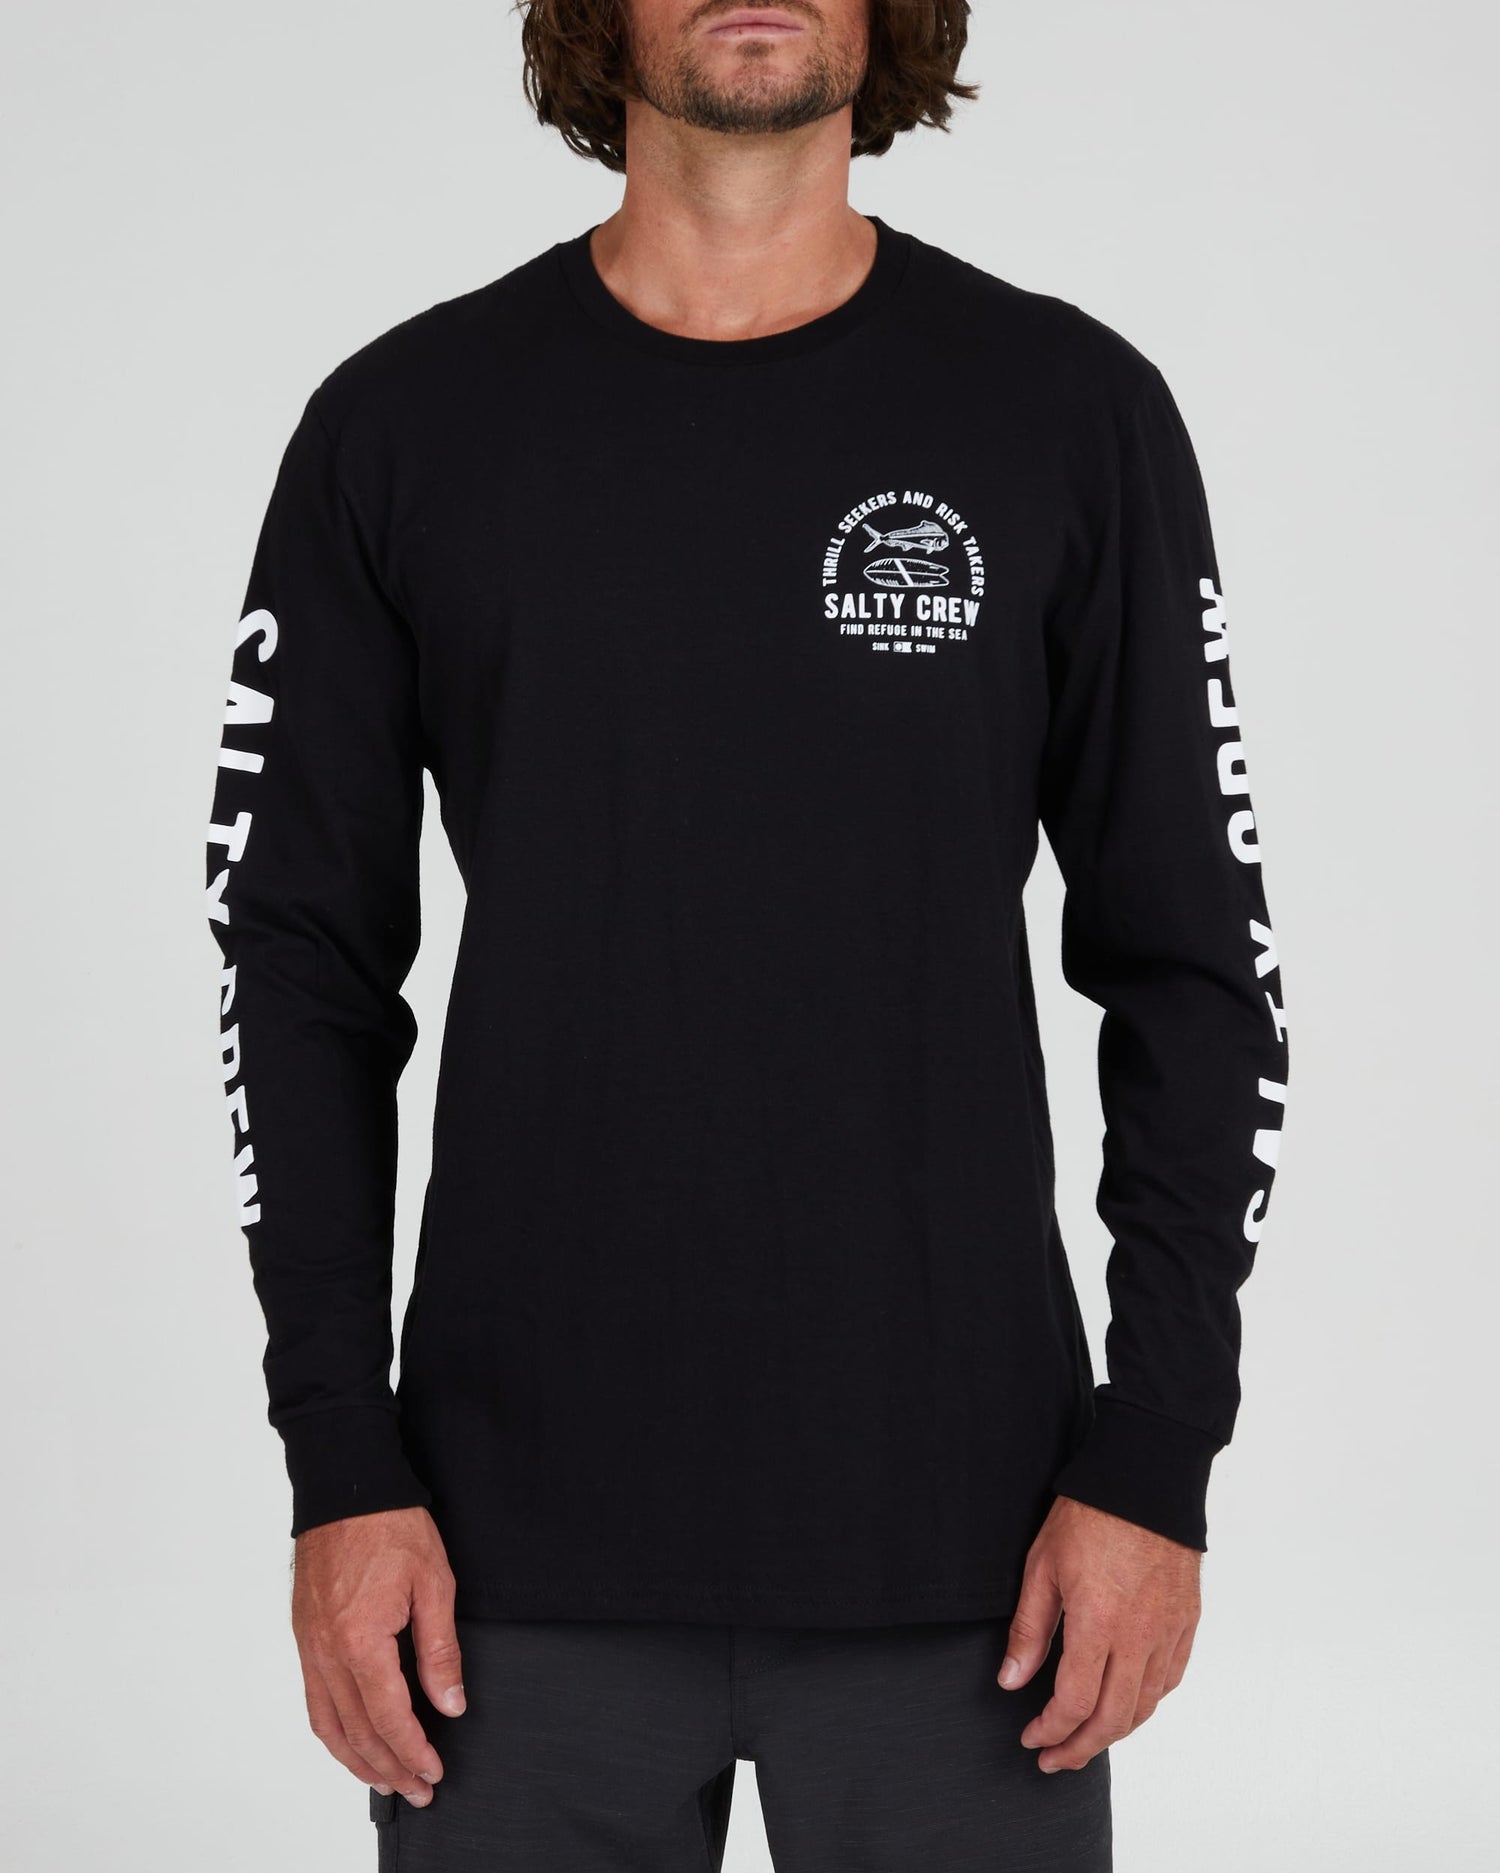 Salty crew T-SHIRTS L/S LATERAL LINE STANDARD L/S TEE - Black in Black